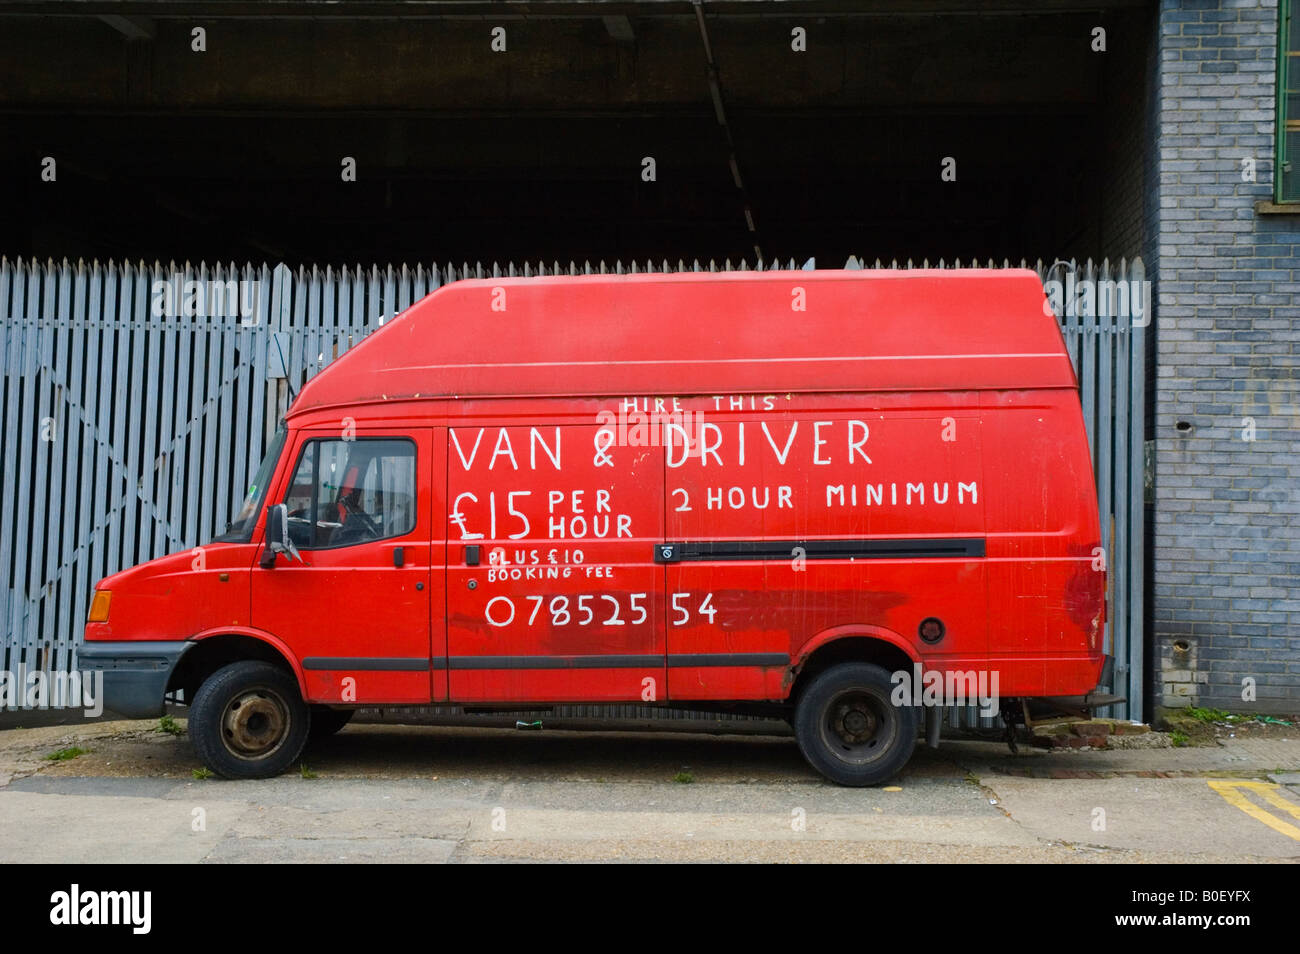 van hire for 21 year olds